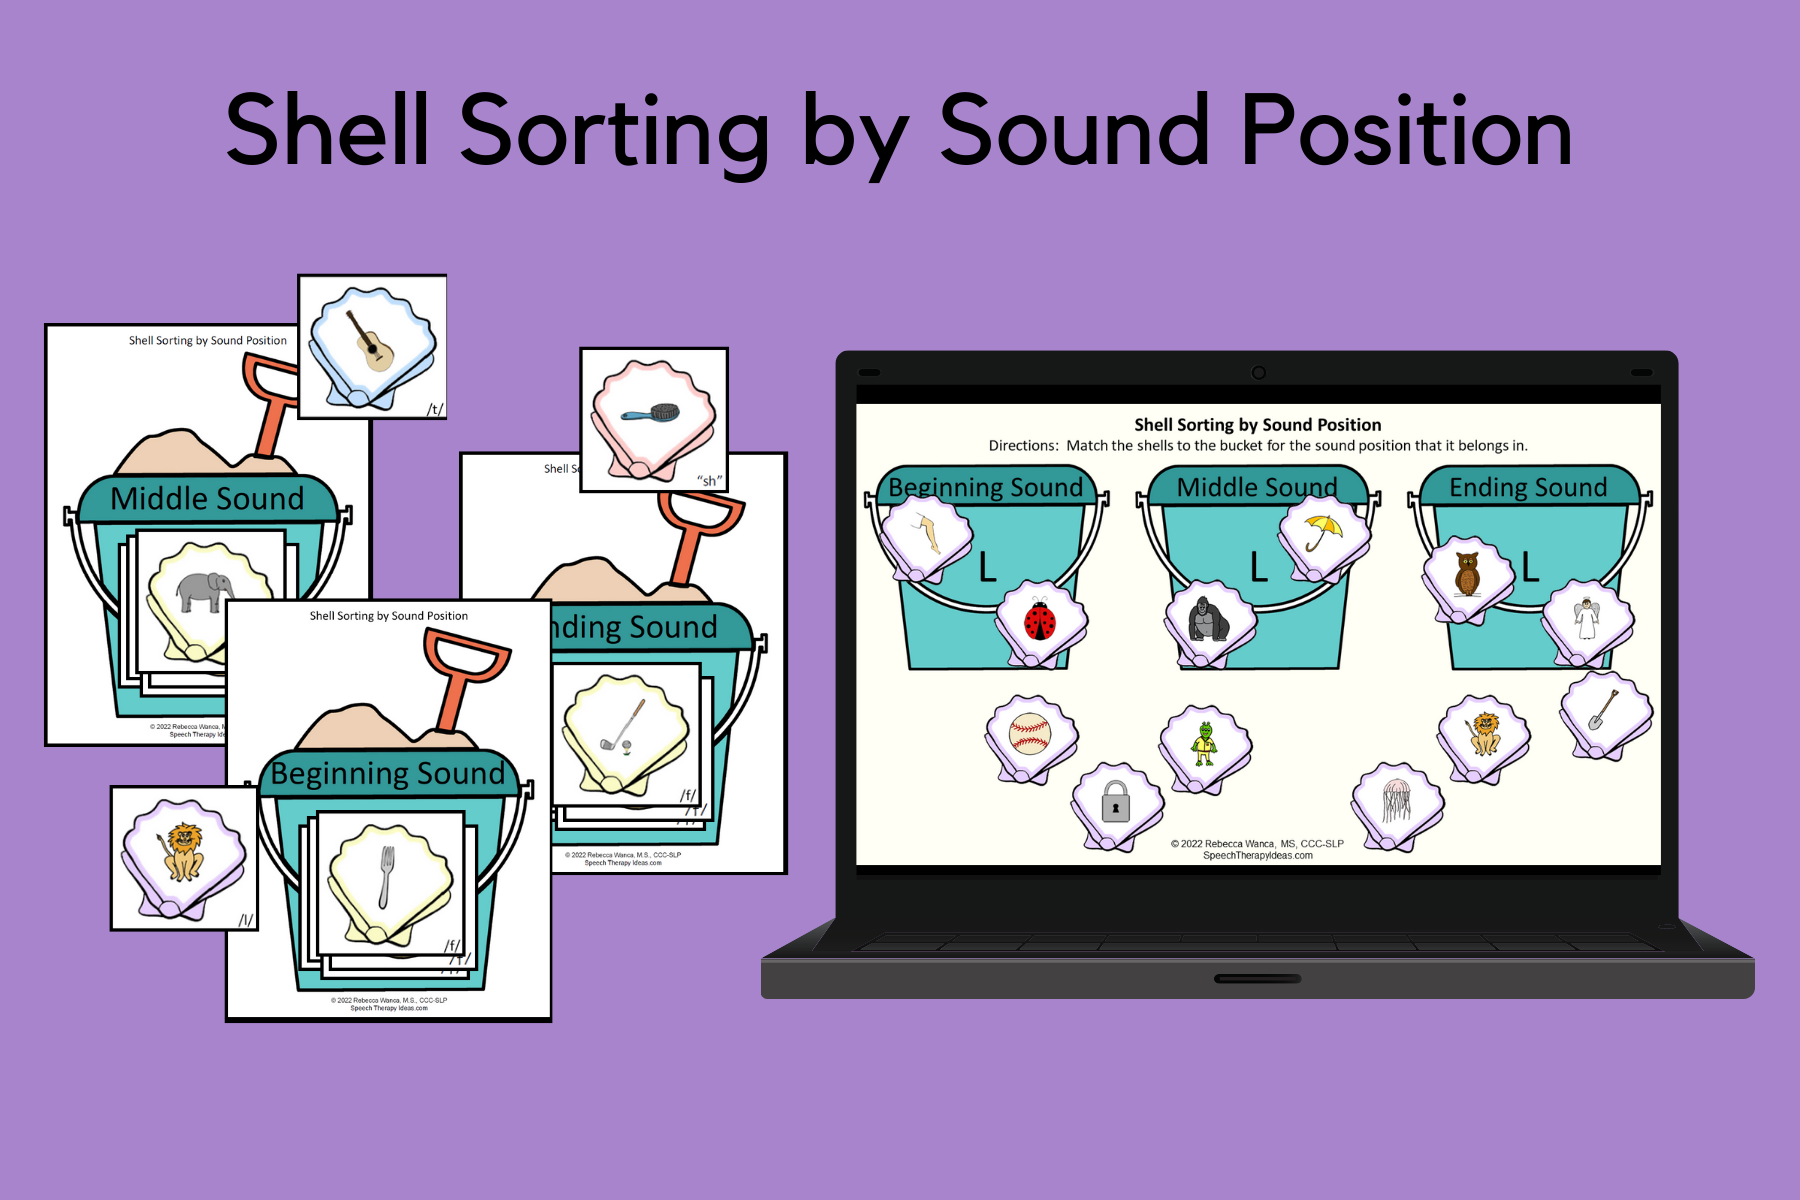 Shell Sorting by Sound Position